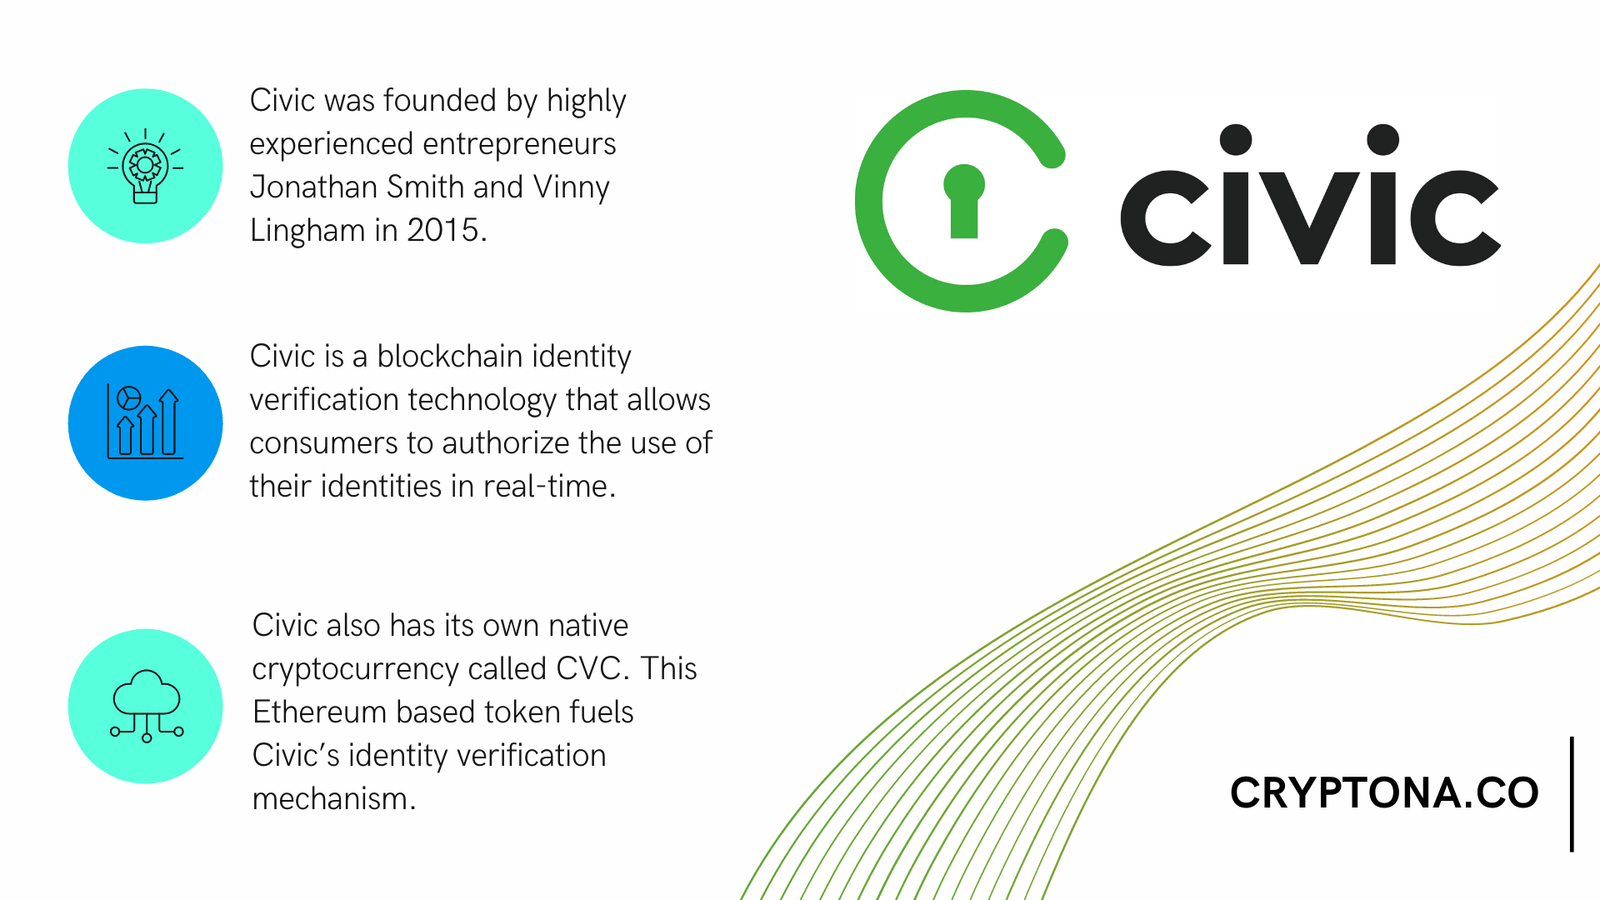 What is Civic cryptocurrency?